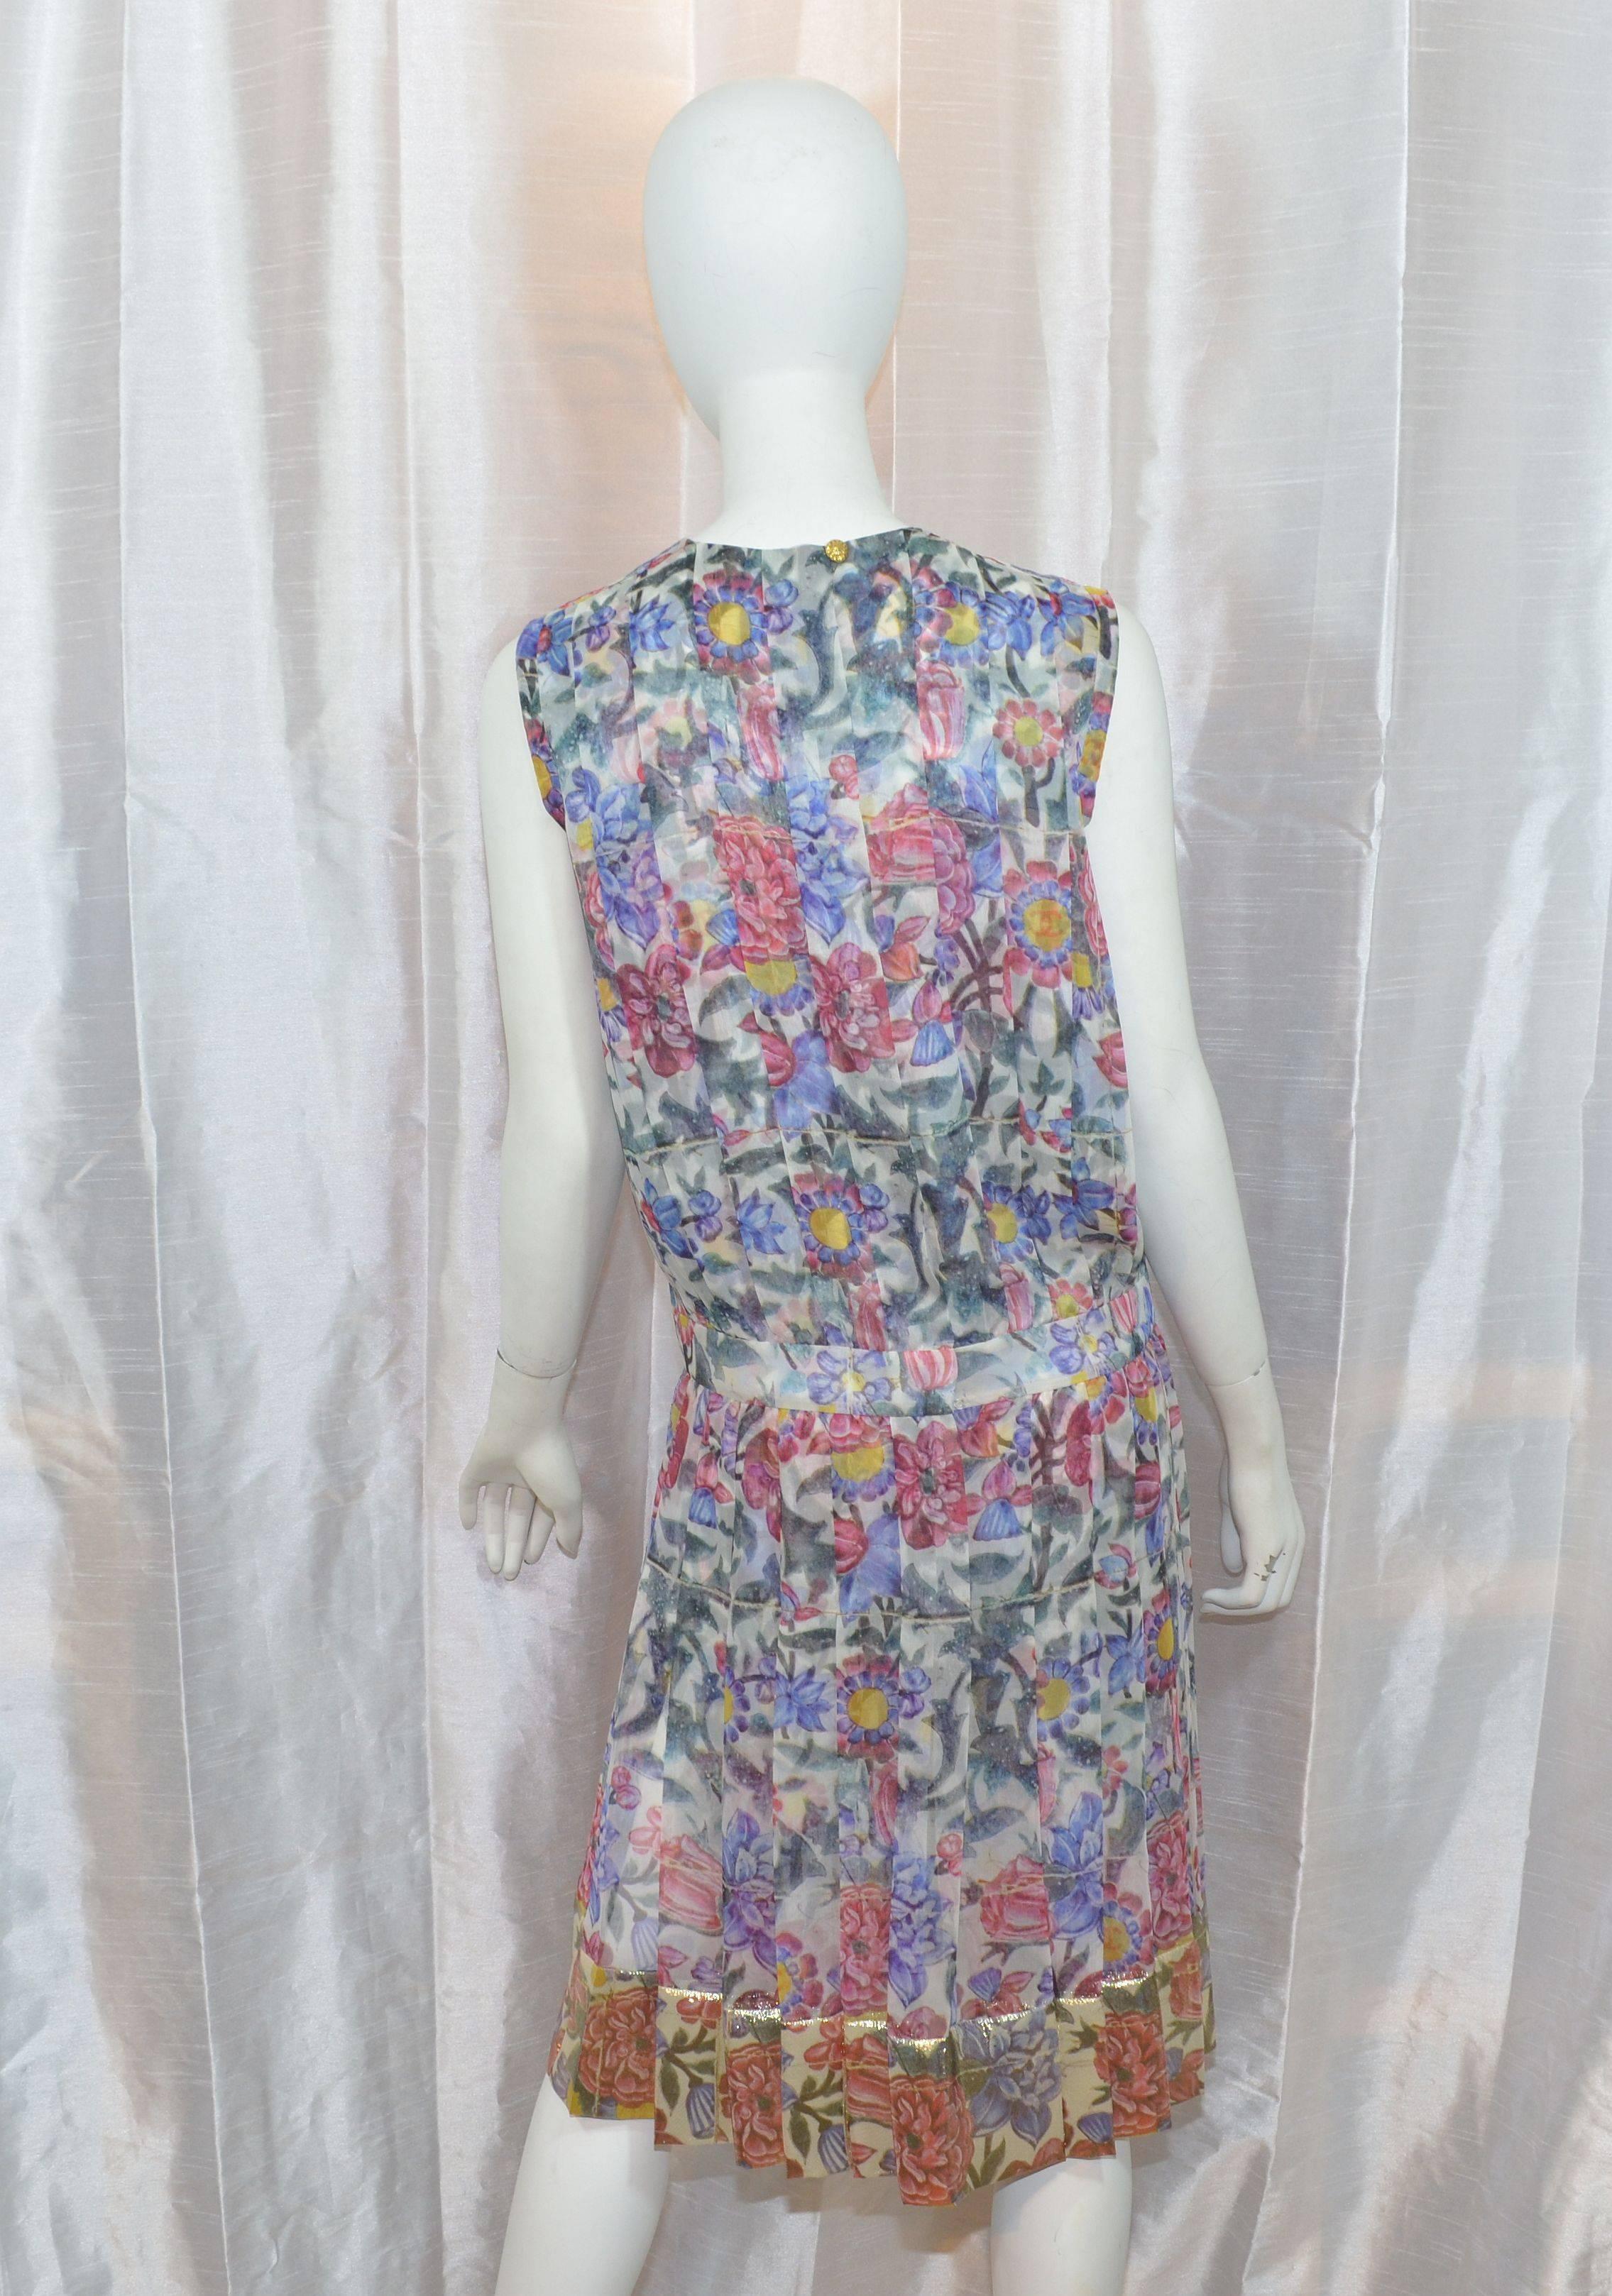 Chanel Resort 2015 Runway Chiffon Floral Dress and Scarf In Excellent Condition In Carmel, CA